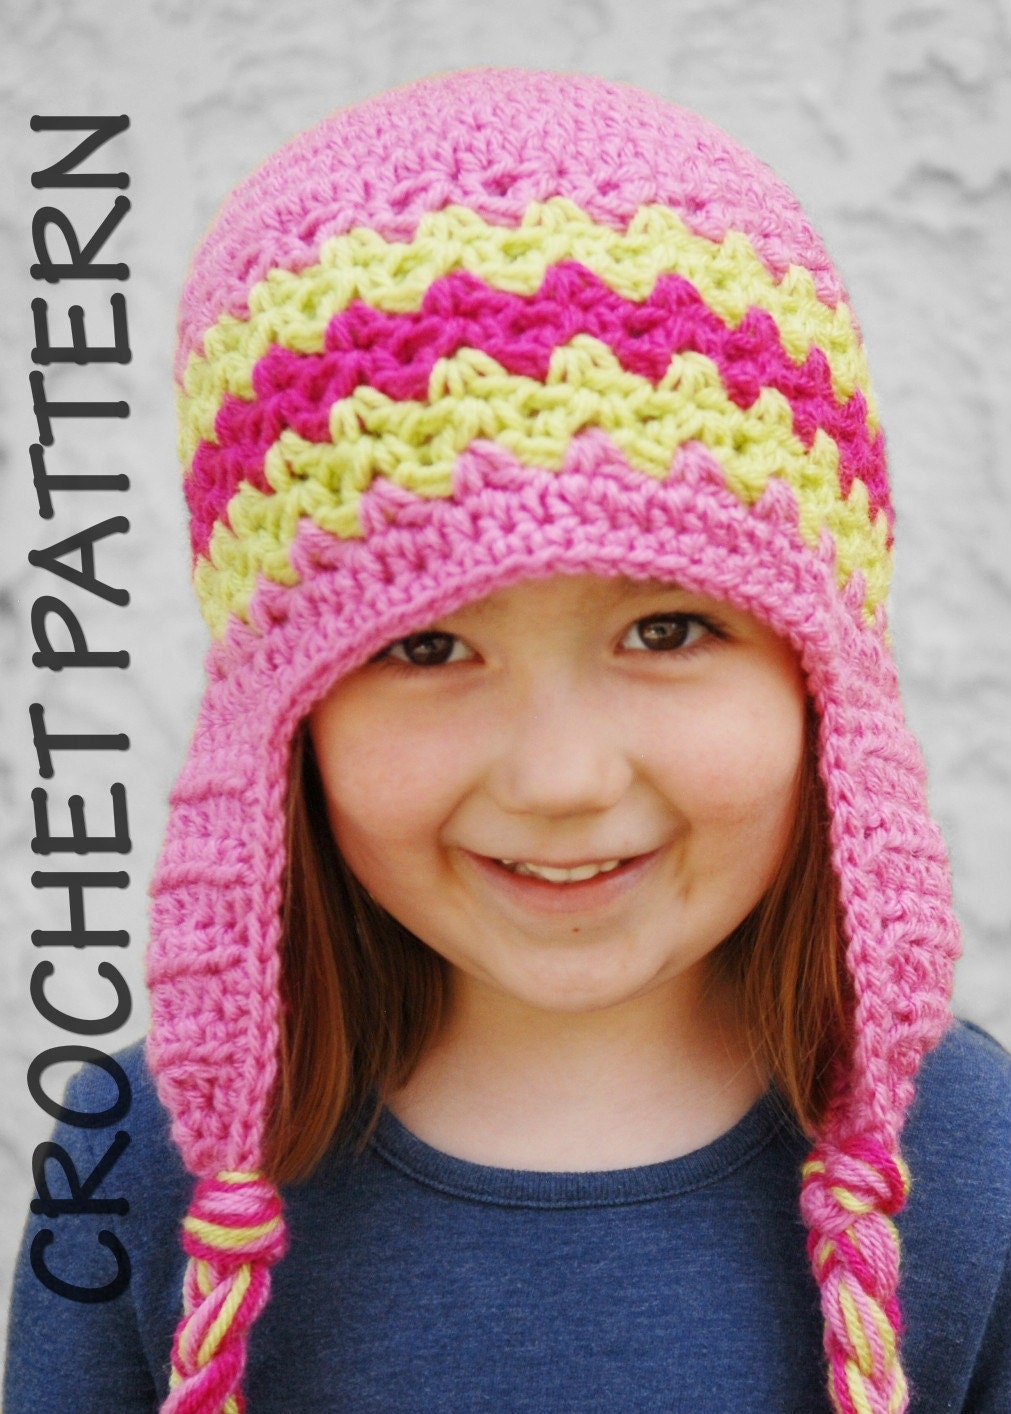 HOLIDAY HATS CROCHET PATTERN FROM RED HEART YARN | FAVECRAFTS.COM